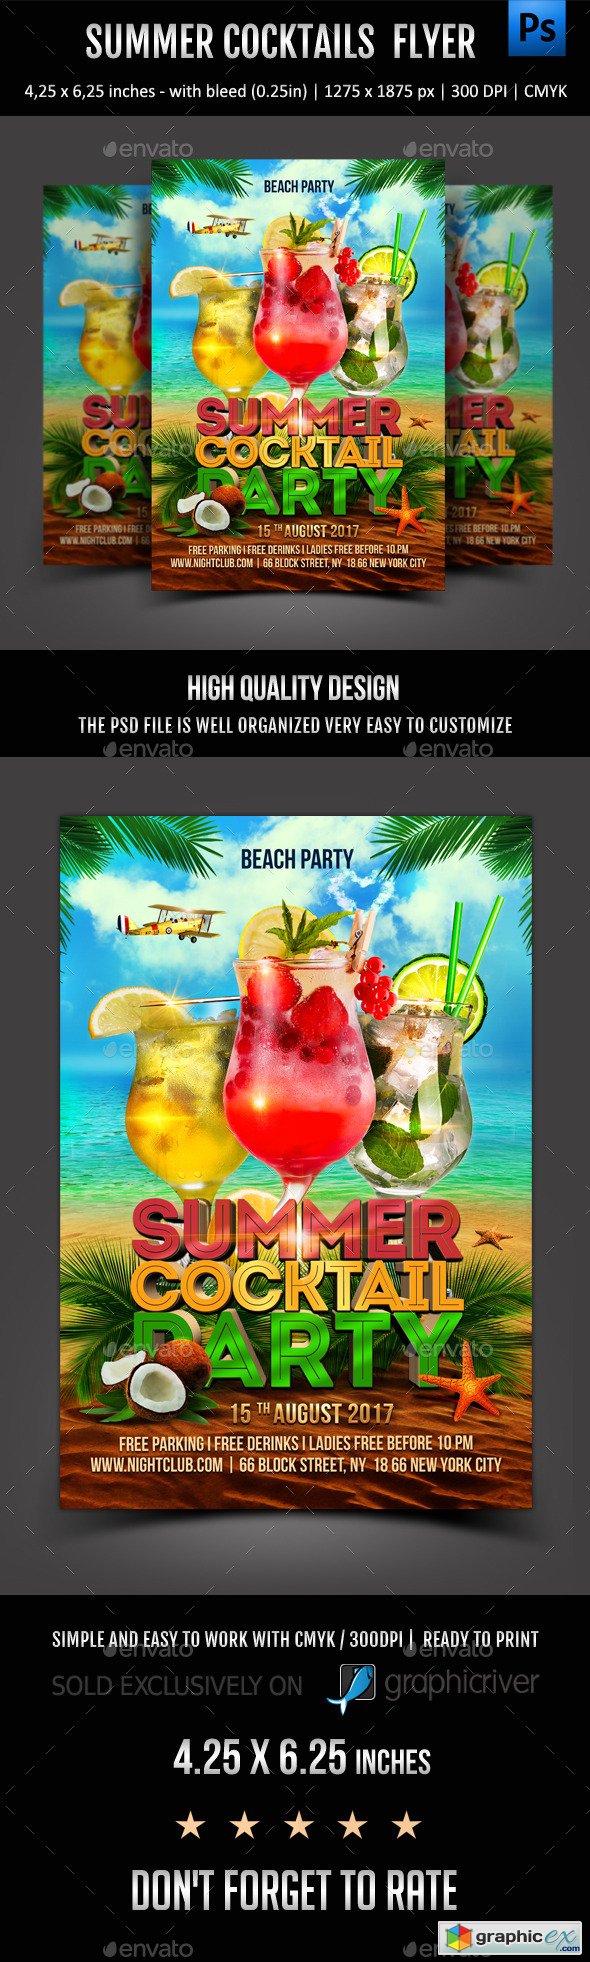 Summer Cocktails Party Flyer